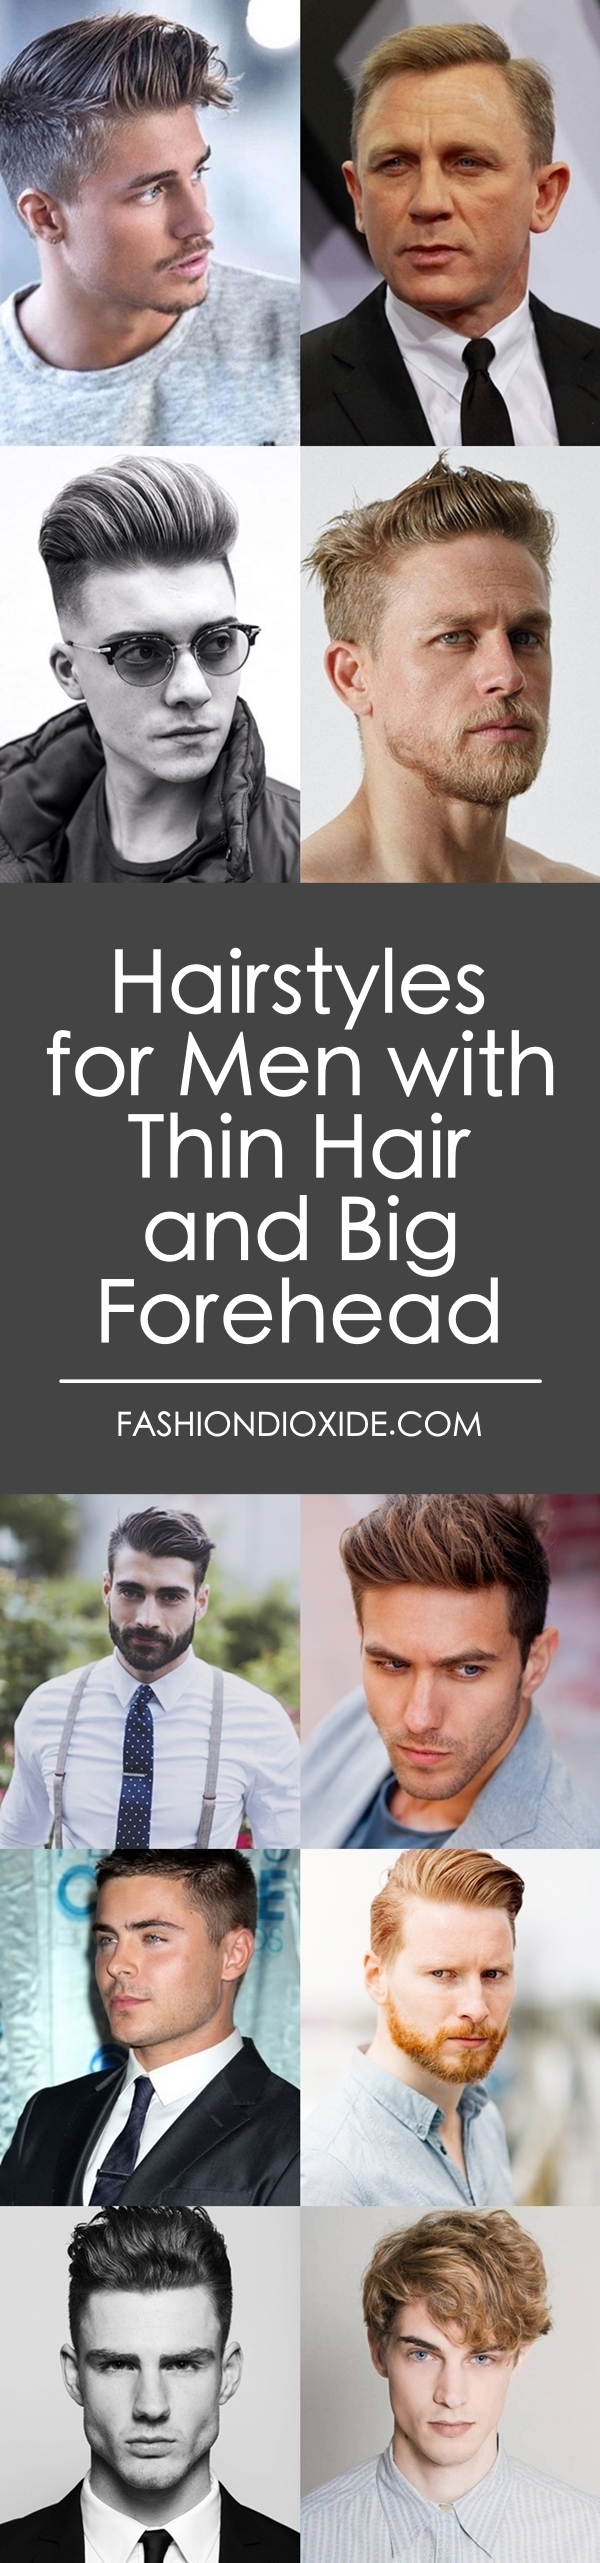 Hairstyles for Men with Thin Hair and Big Forehead